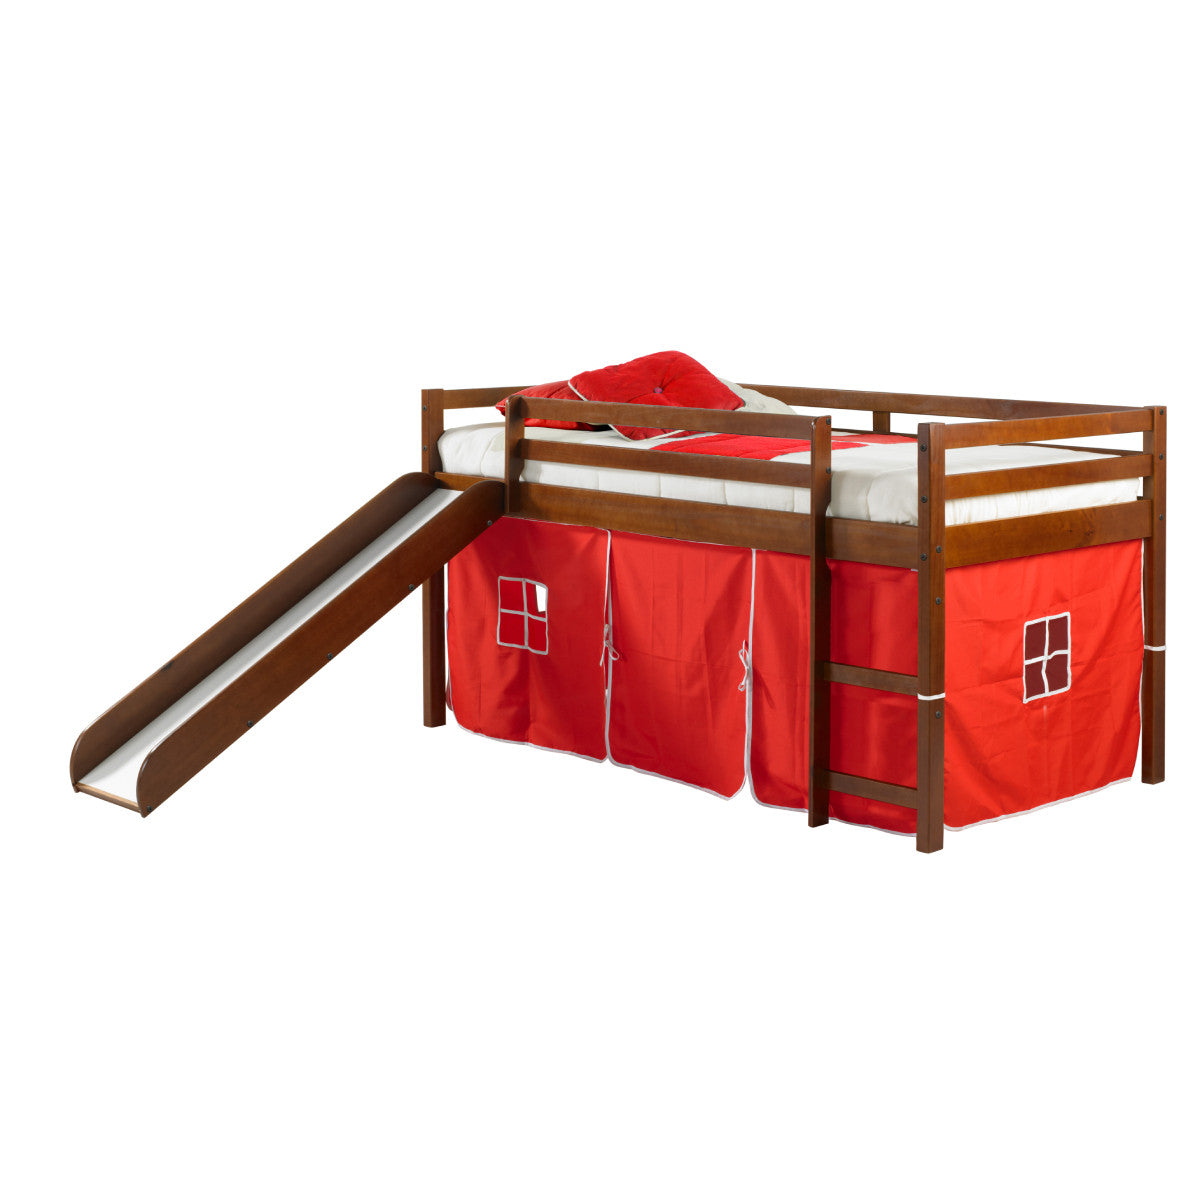 TENT BED ESPRESSO W/RED TENT KIT